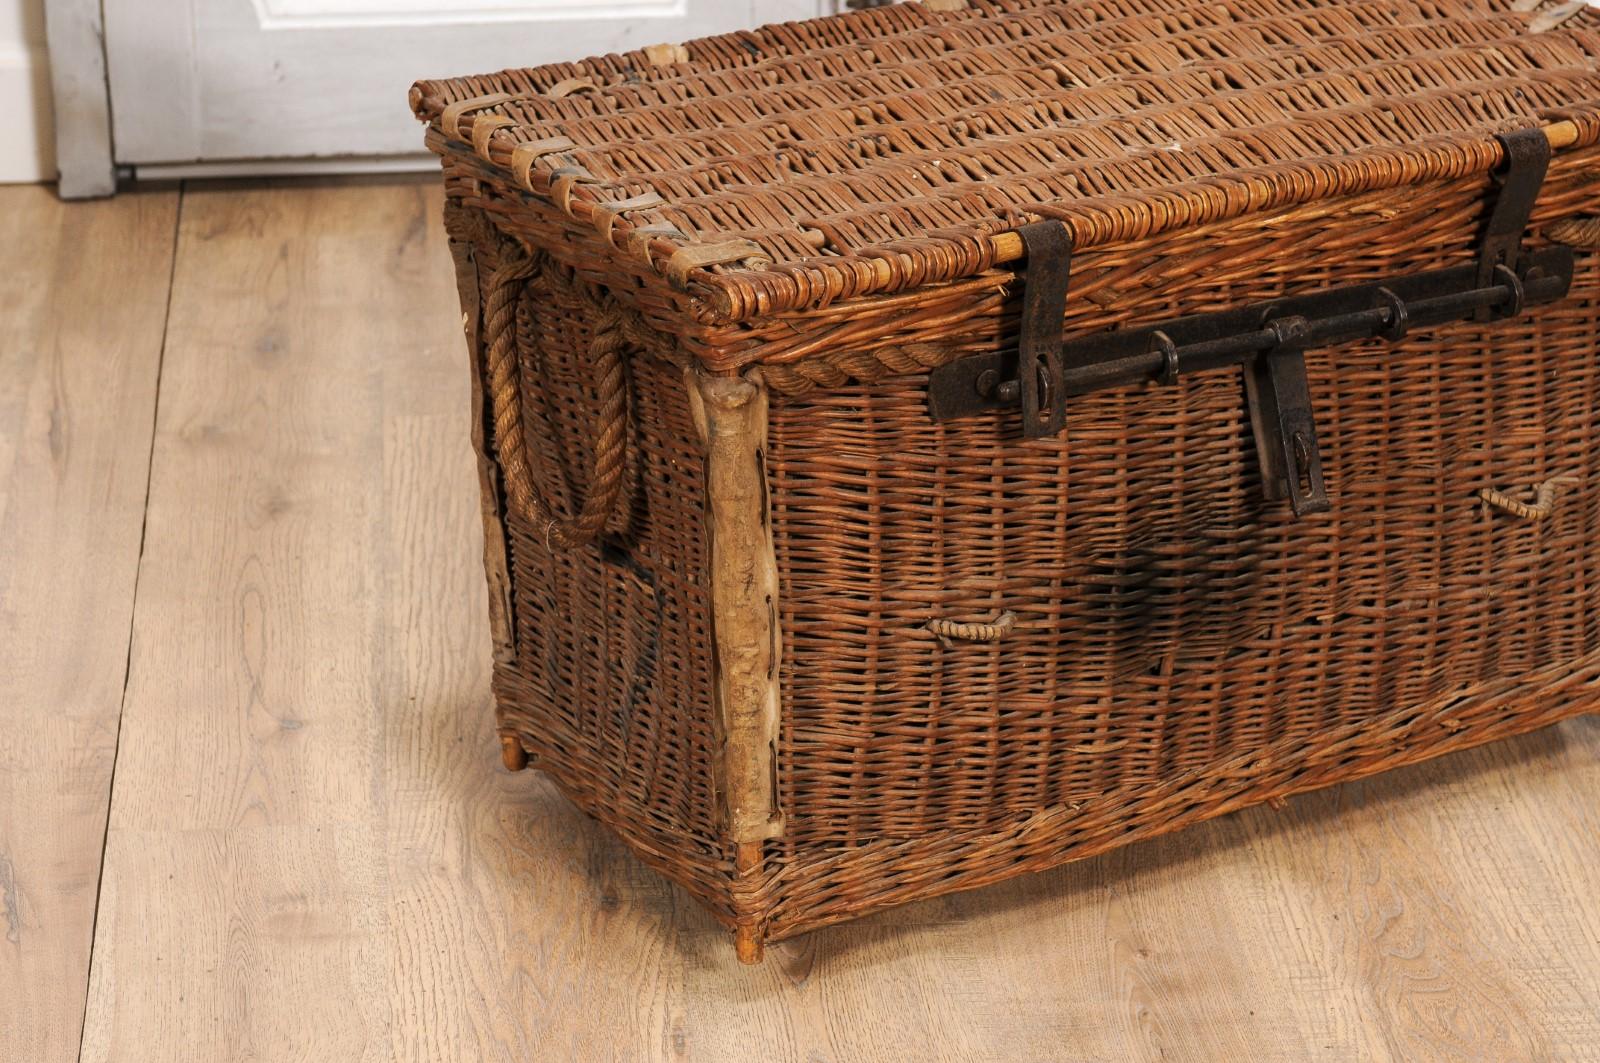 English Rustic 1930s Wicker Trunk with Iron Hardware and Lateral Handles In Good Condition For Sale In Atlanta, GA